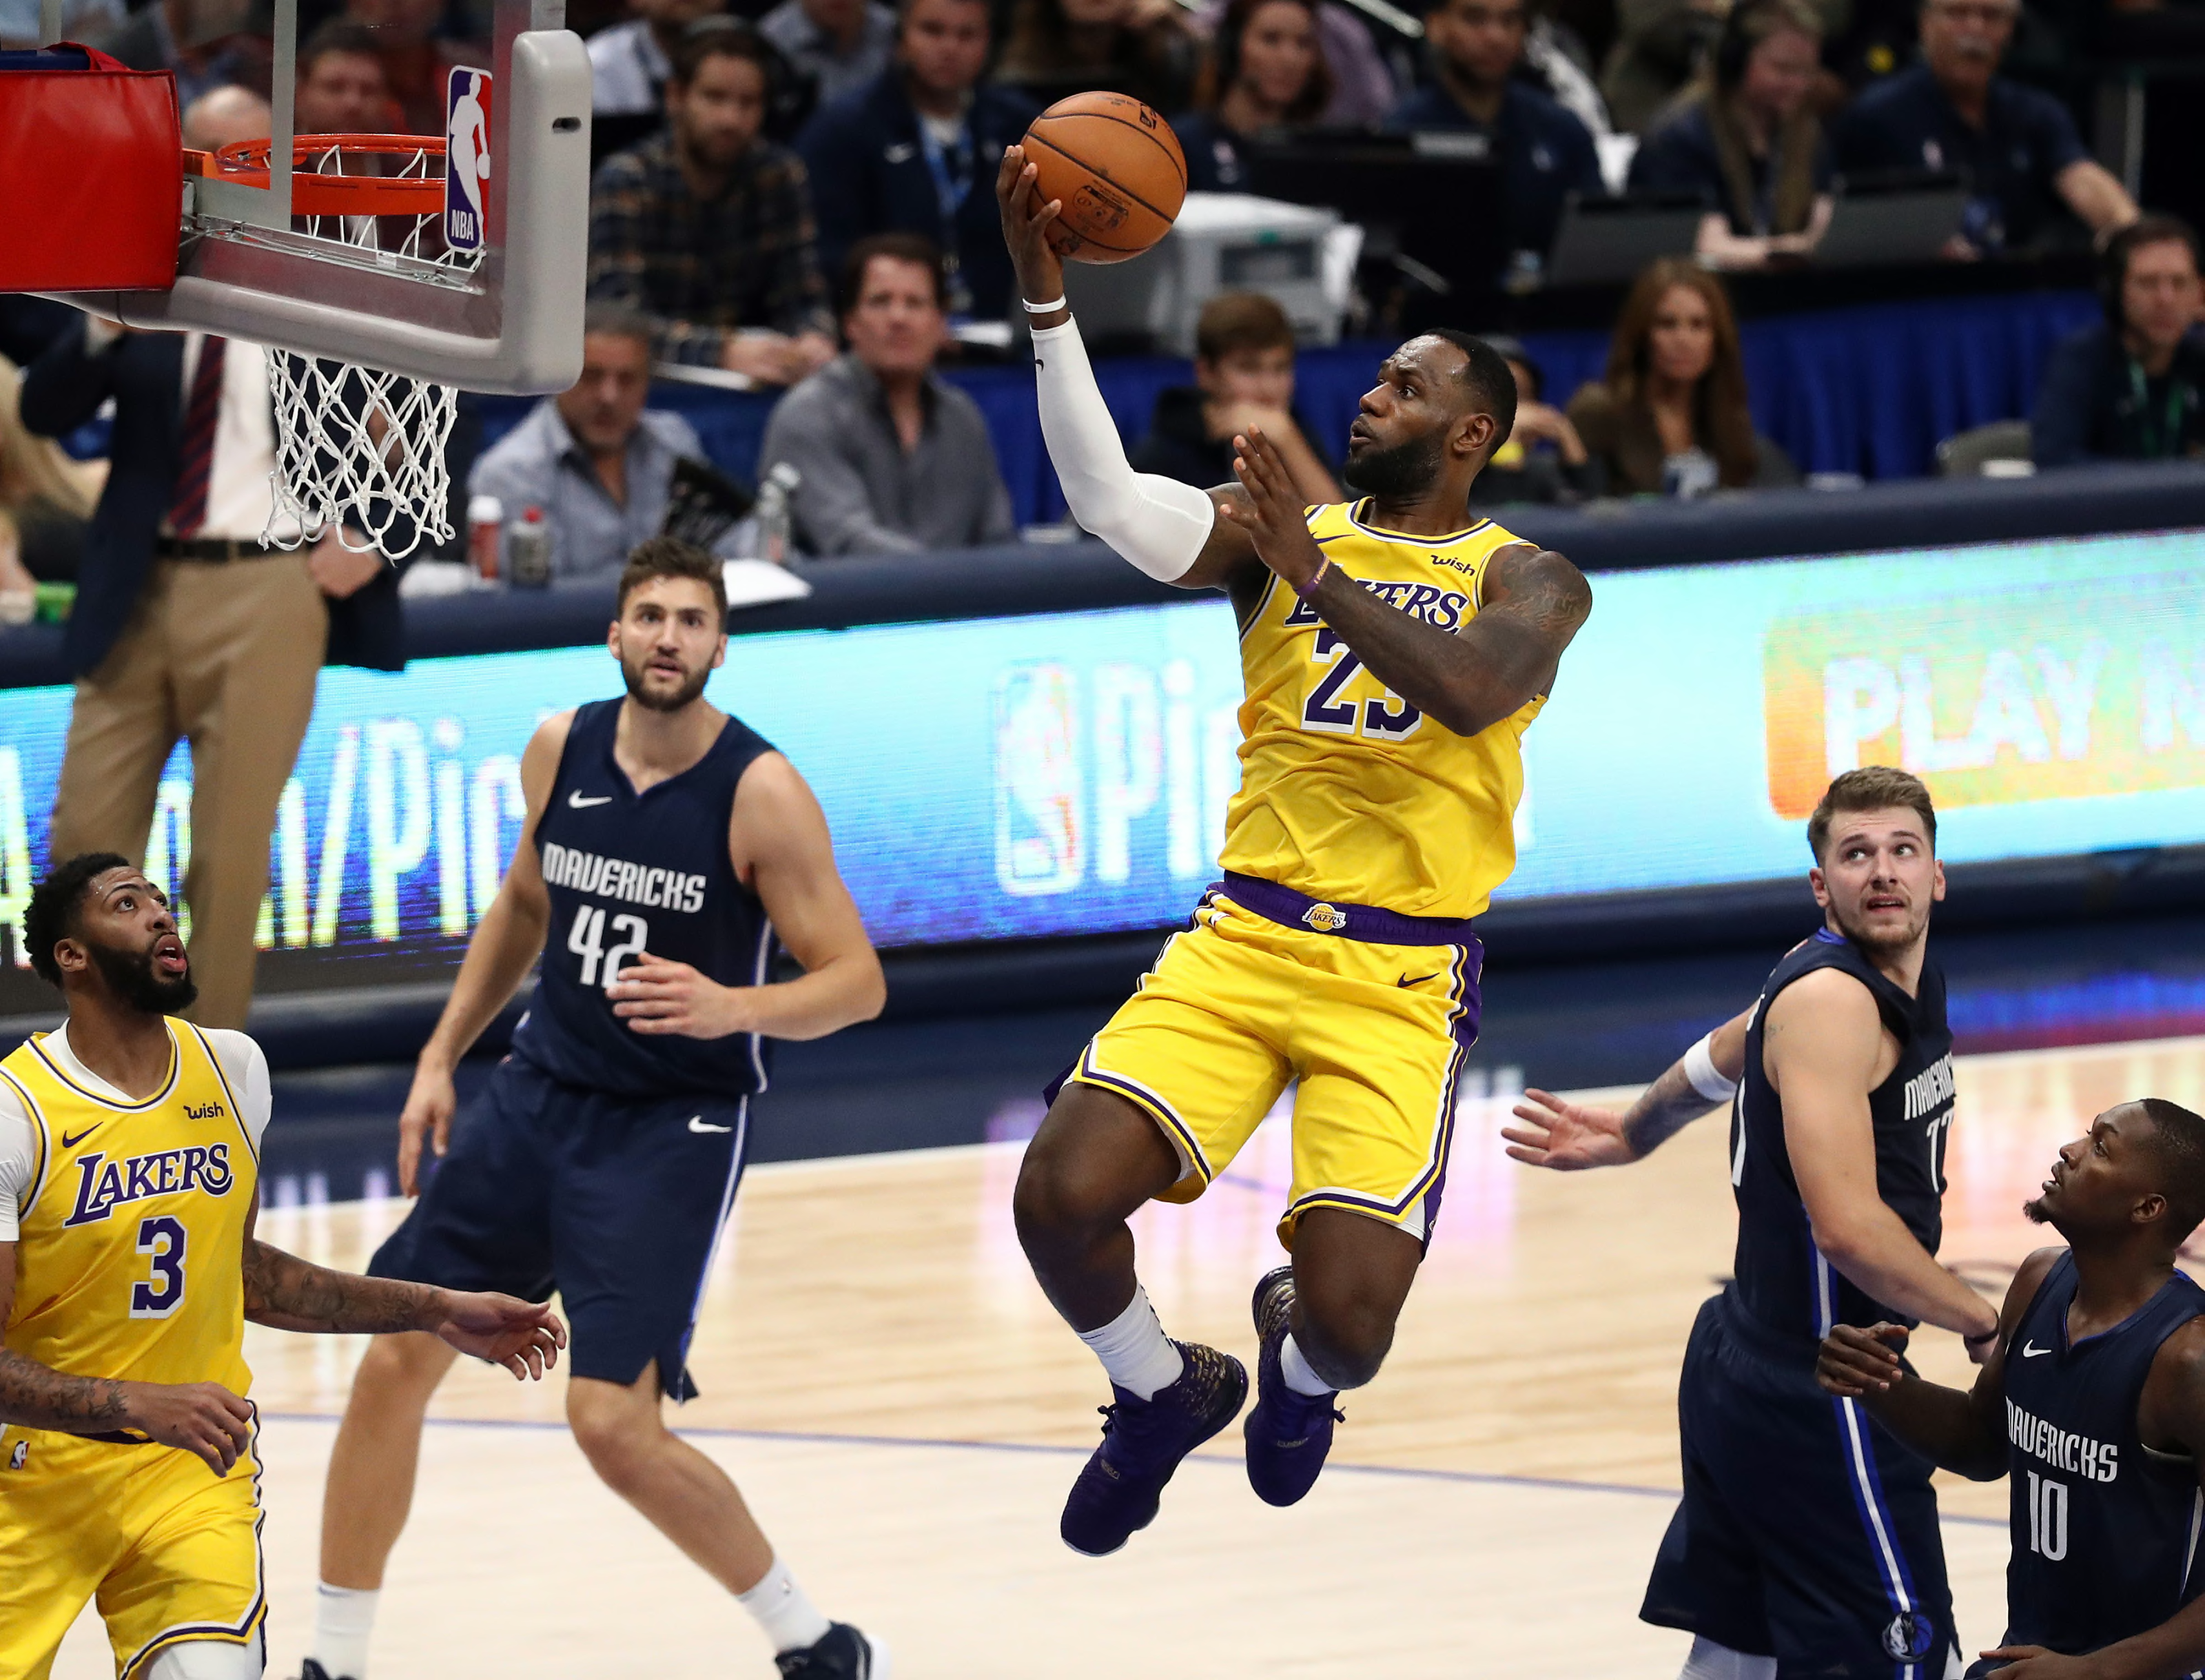 Lakers lose to Mavericks in double OT in physical game - Los